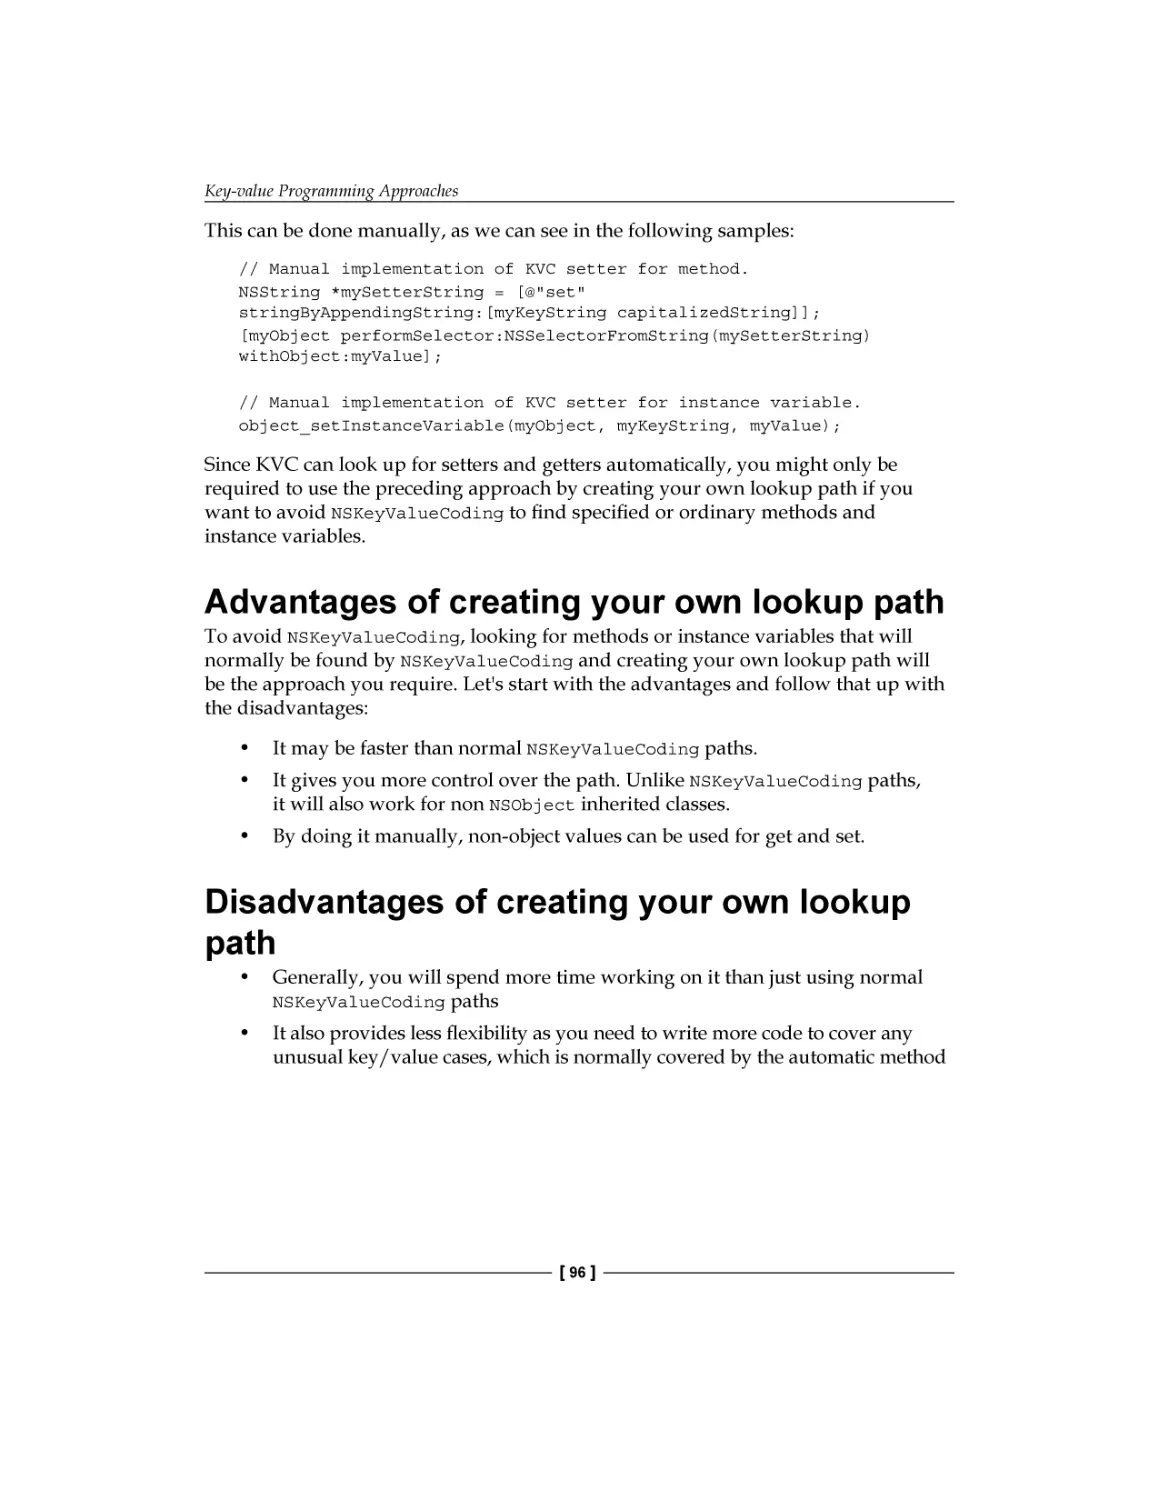 Advantages of creating your own lookup path
Disadvantages of creating your own lookup path